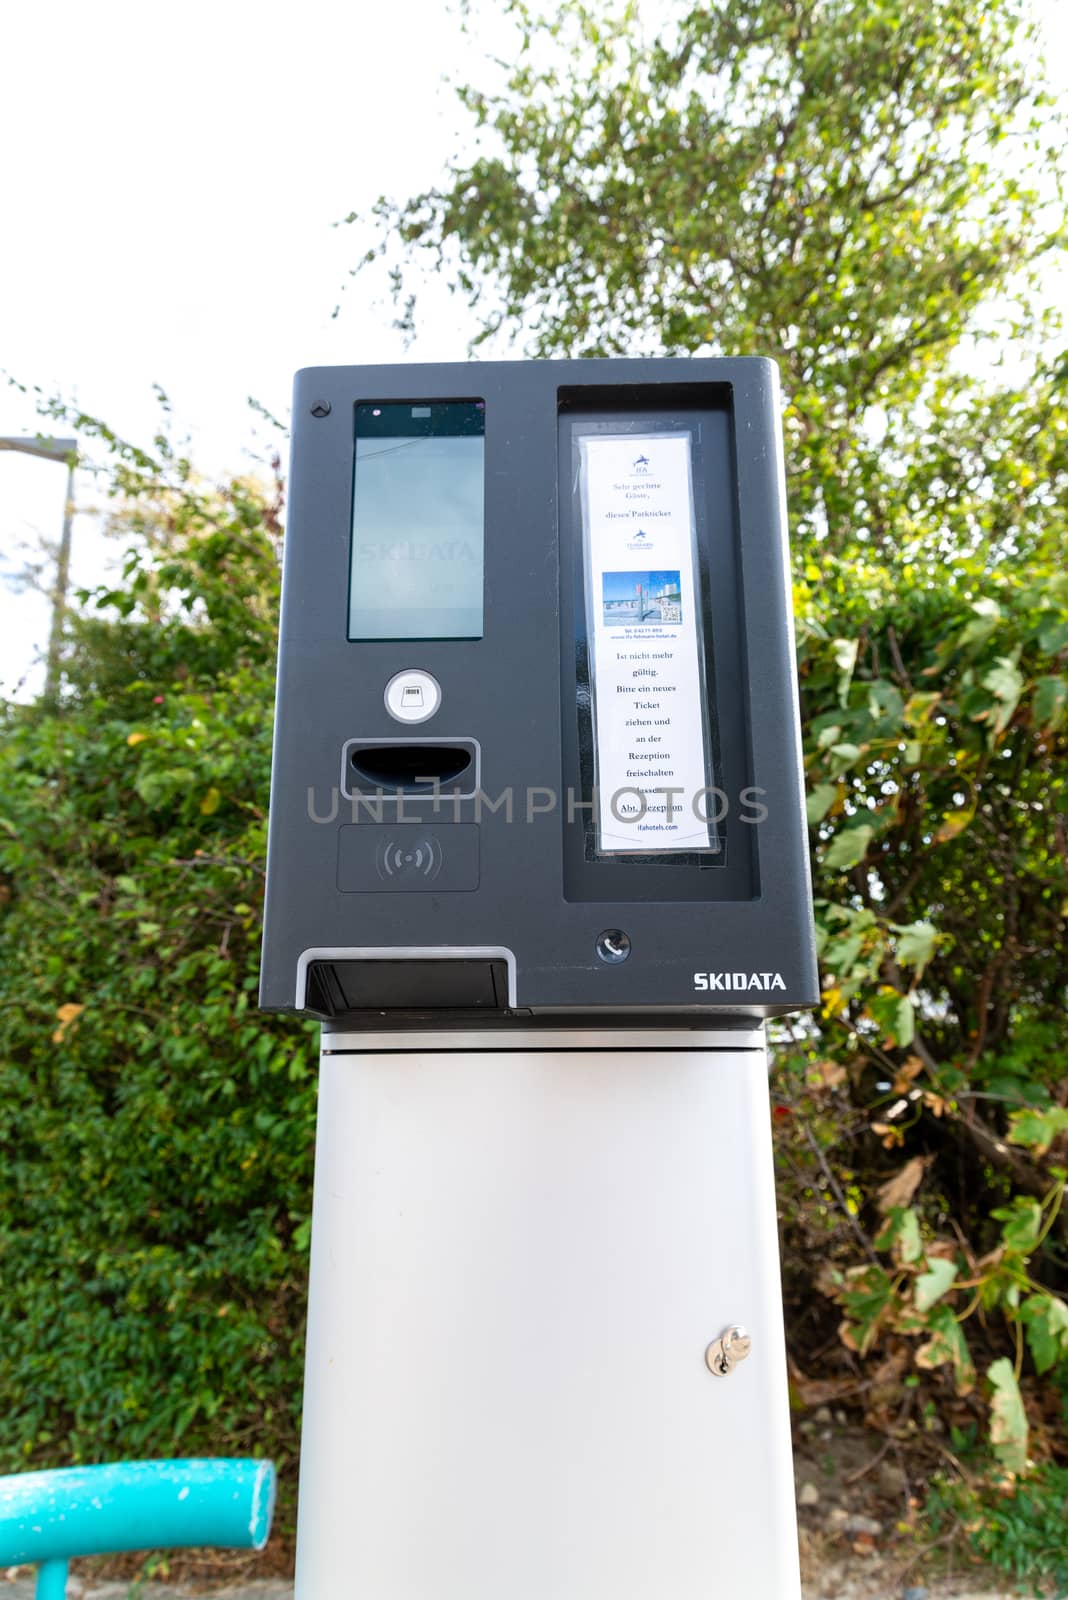 Fehmarn, Schleswig-Holstein/Germany - 05.09.2019: A ticket machine with display for a barrier system from a private parking lot of a hotel, where you pay at the reception